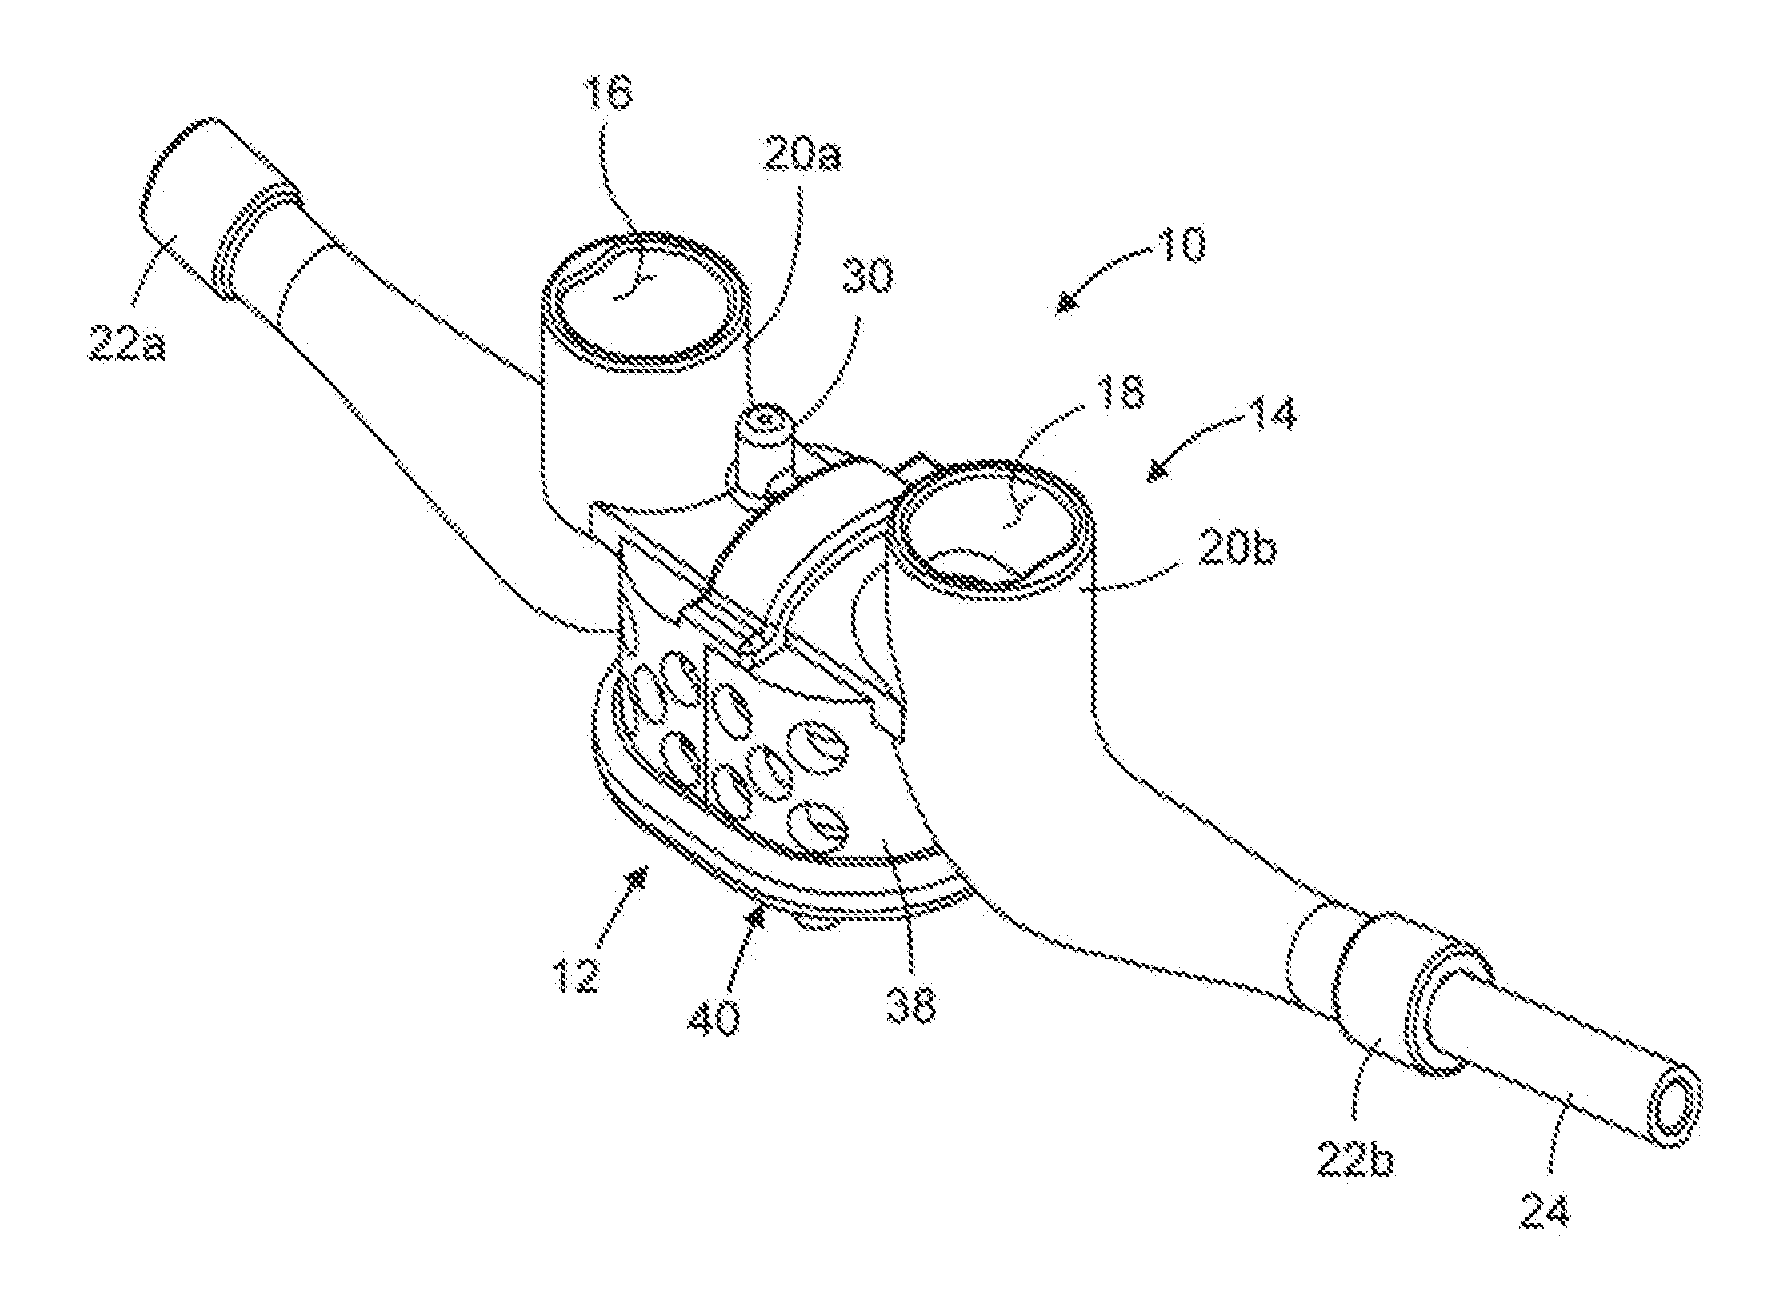 Ventilation Mask with Integrated Piloted Exhalation Valve And Method of Ventilating a Patient Using the Same